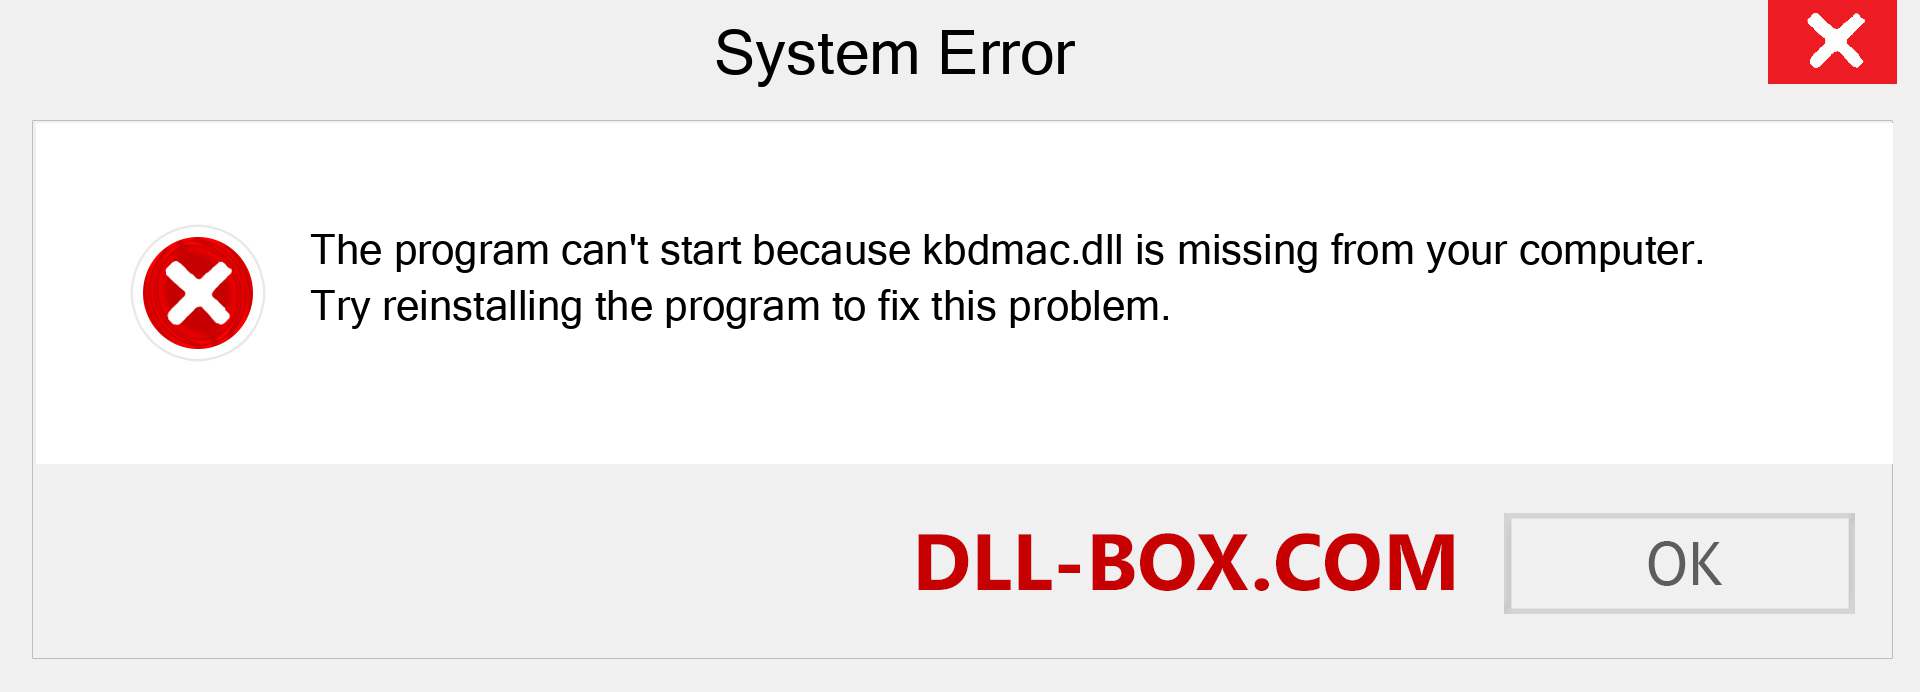  kbdmac.dll file is missing?. Download for Windows 7, 8, 10 - Fix  kbdmac dll Missing Error on Windows, photos, images